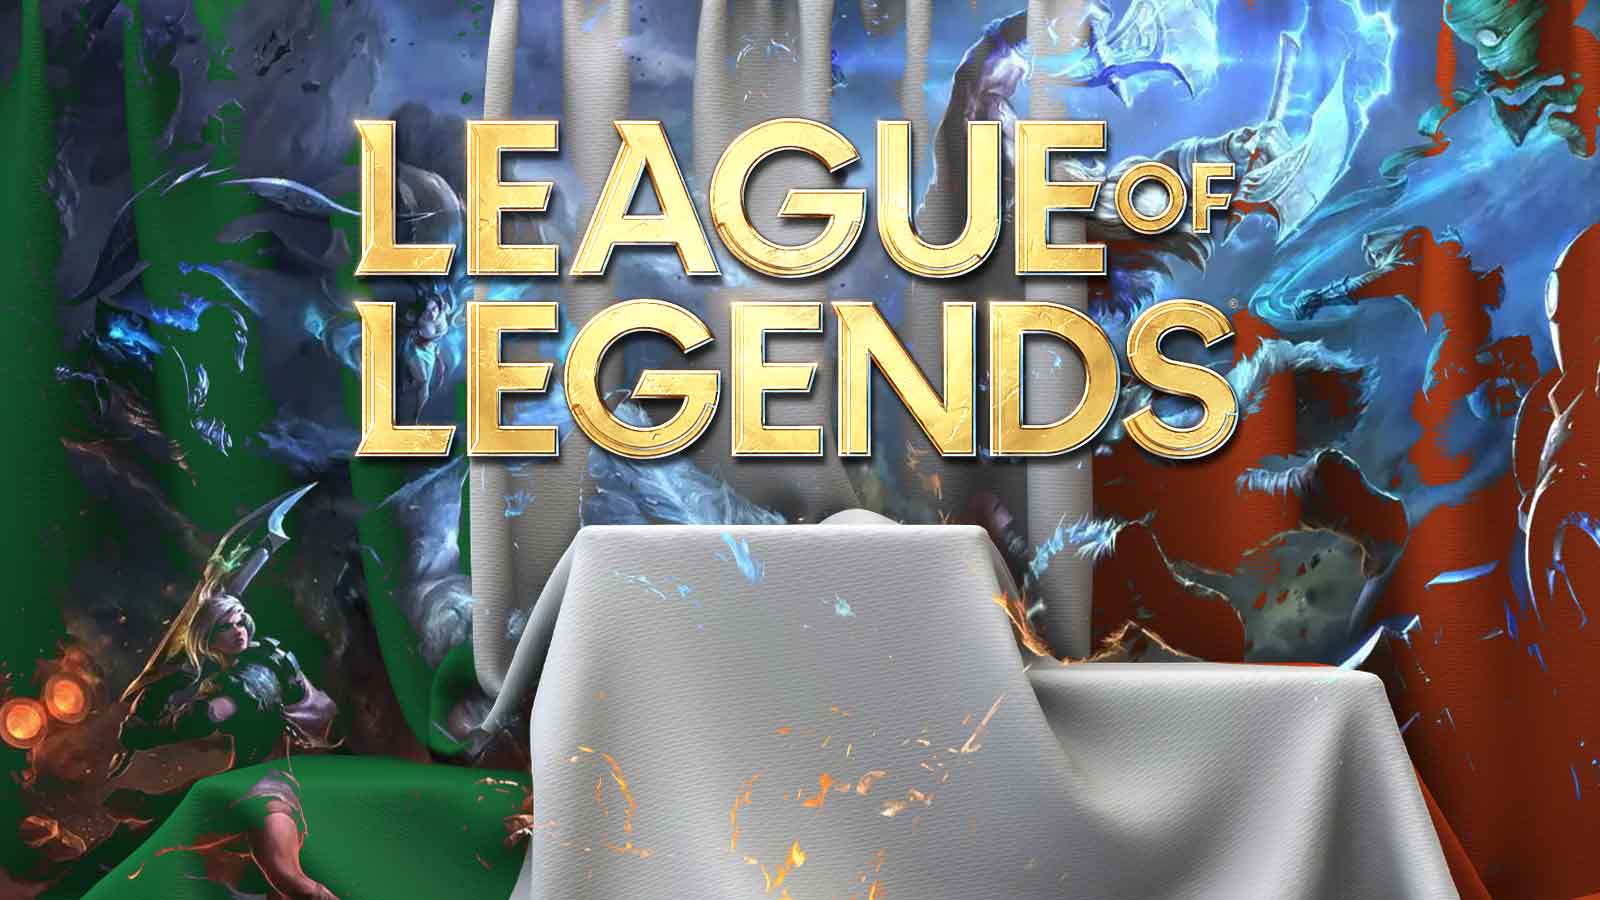 Is League Of Legends one popular eSports game in Irland